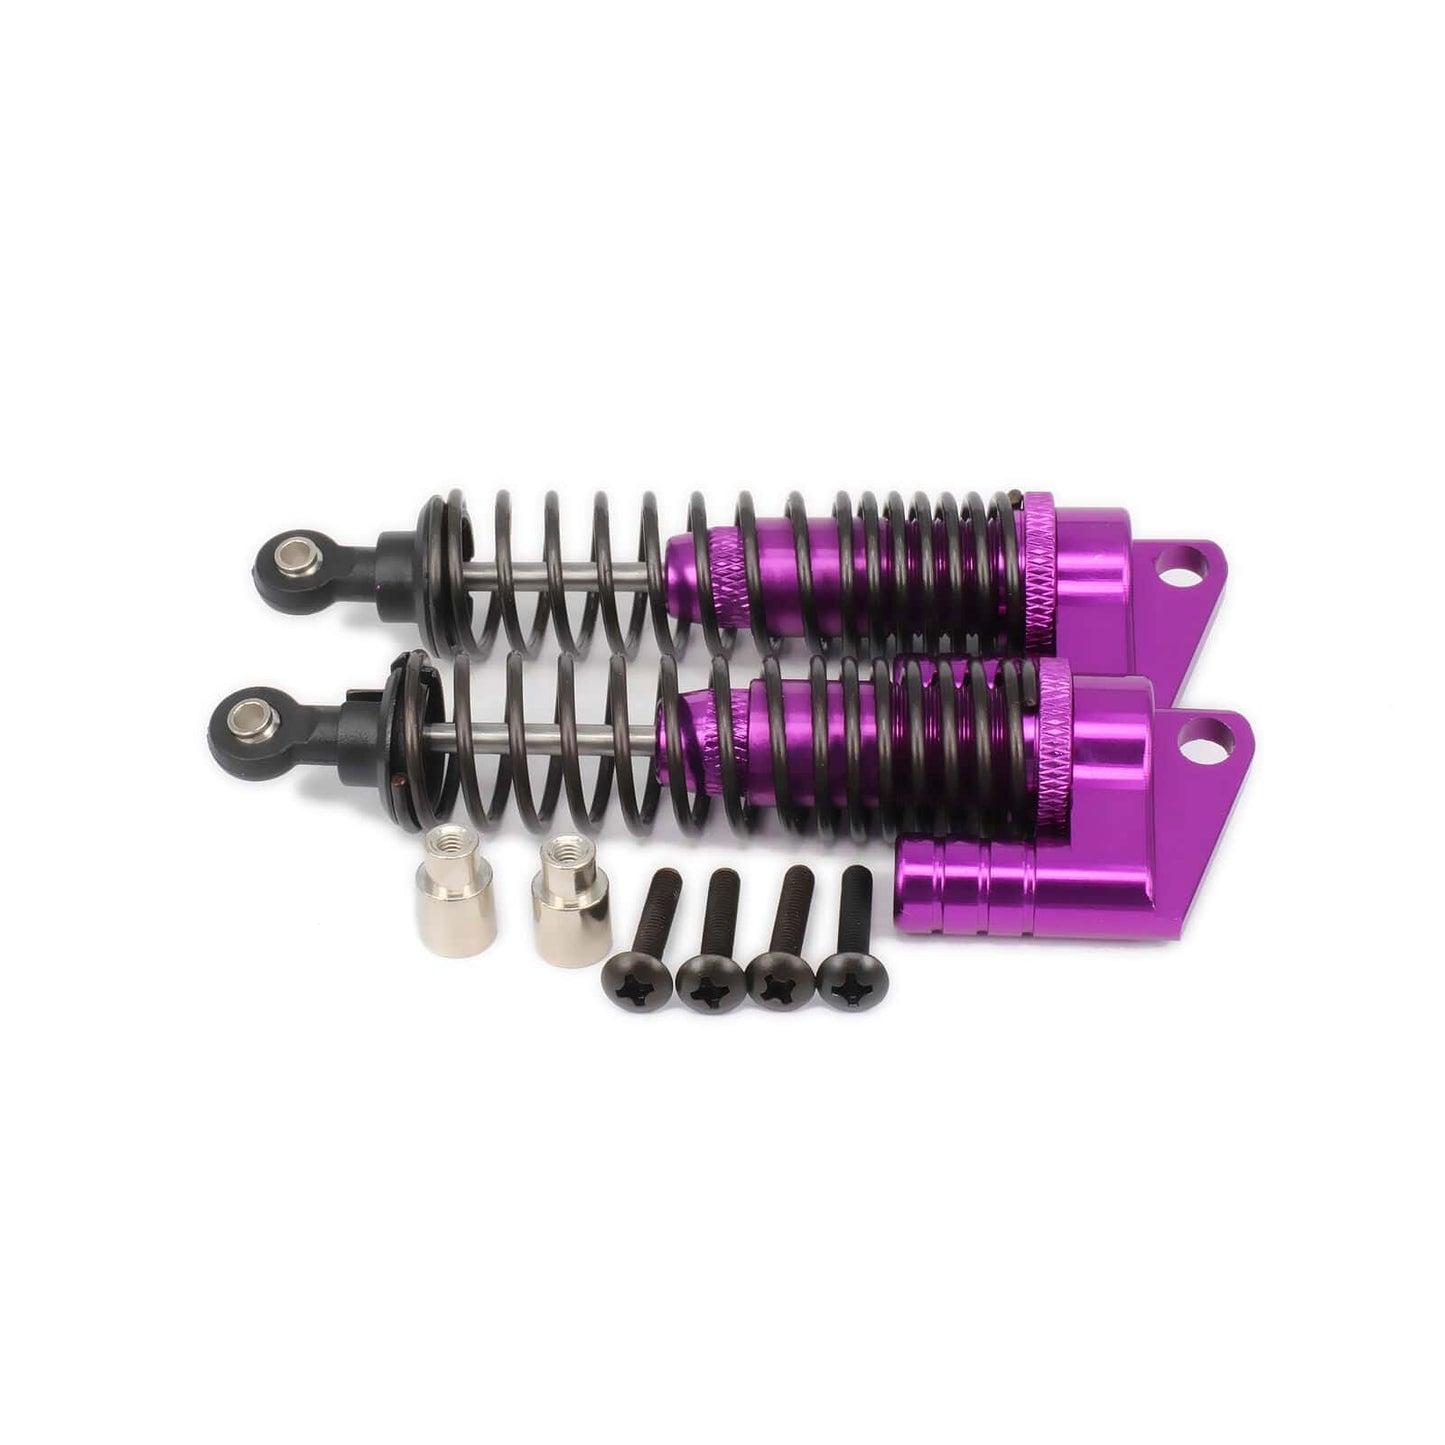 RCAWD UNIVERSAL RC UPGRADE PARTS Purple RCAWD Universal 100mm Alloy Shock Absorber Damper  S106004 for RC Car 1/10 Buggy Truck Crawler